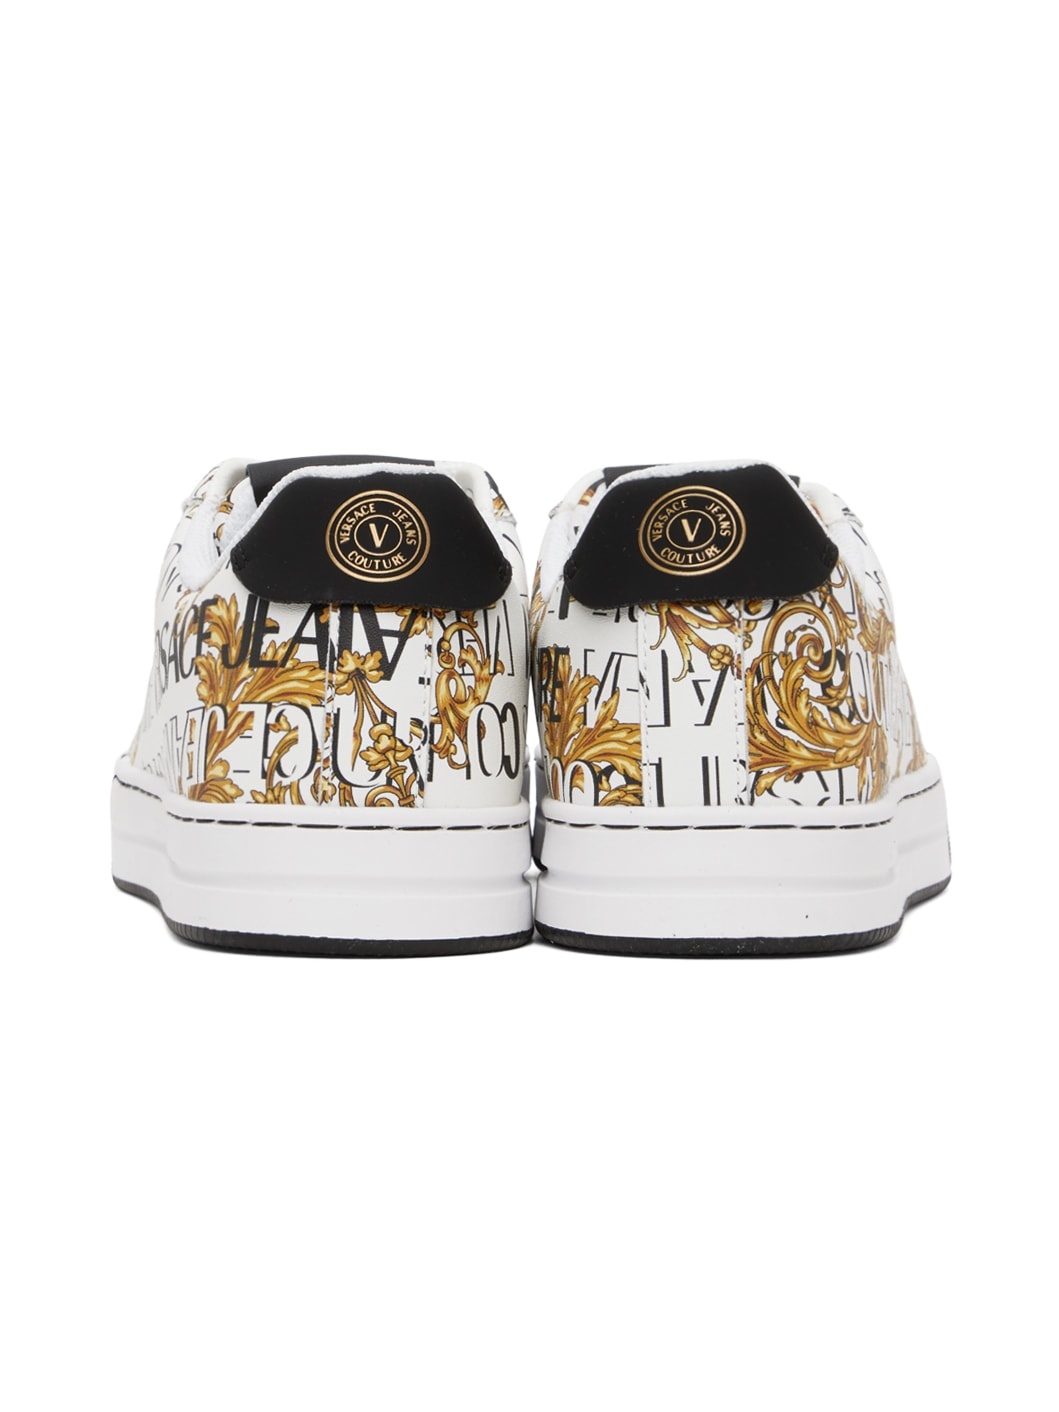 White & Gold Court 88 Sneakers - 2